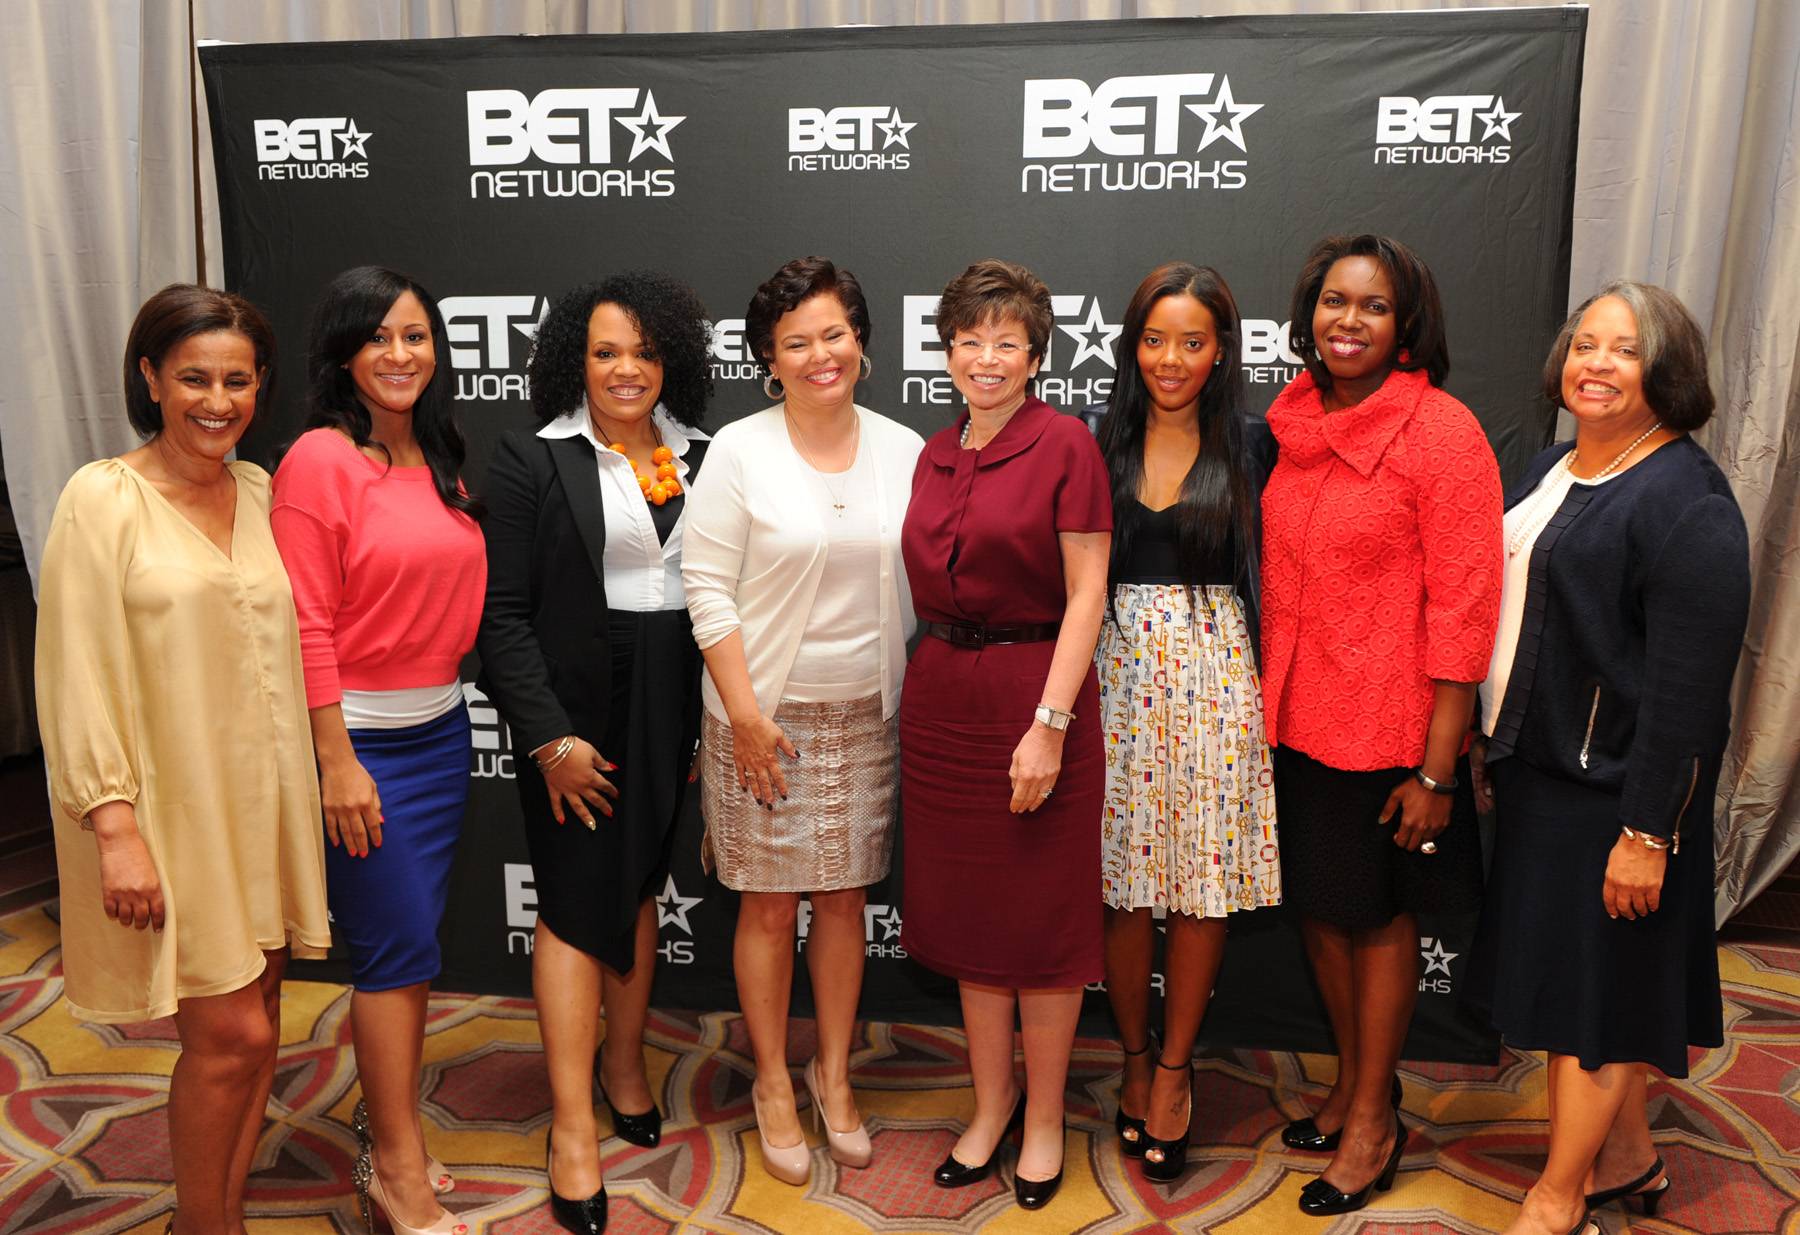 Independent Women - Angela Simmons, Lisa Price and Kaye Savage were among the group of groundbreaking female entrepreneurs who attended the&nbsp;“Owned and Operated: Phenomenal Women at the Helm”&nbsp;session on March 19 during &nbsp;BET Networks’ Leading Women Defined&nbsp;summit.—Britt Middleton(All photos By: &nbsp;Phelan Marc / BET)